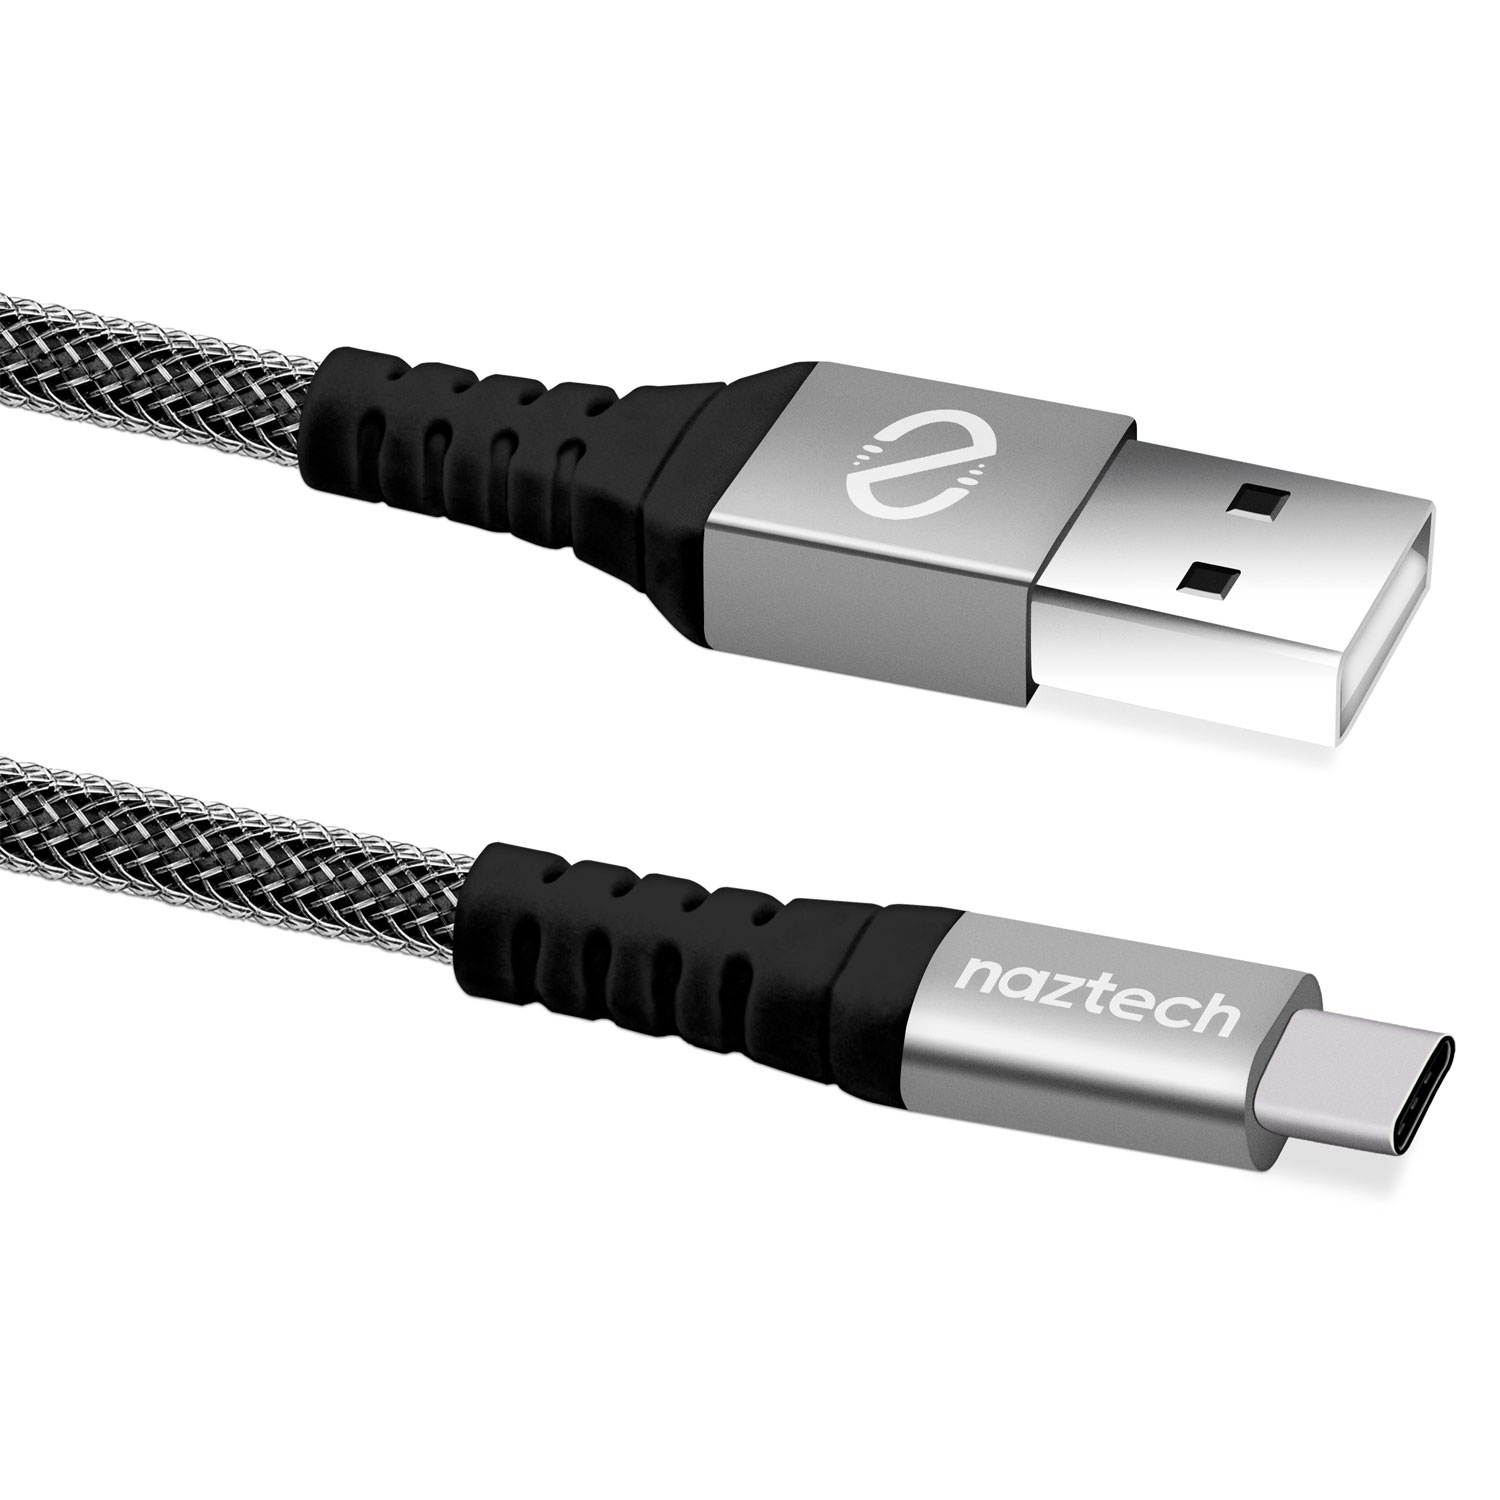 USB-A to USB-C Durable Braided 4' Charge & Sync Cable